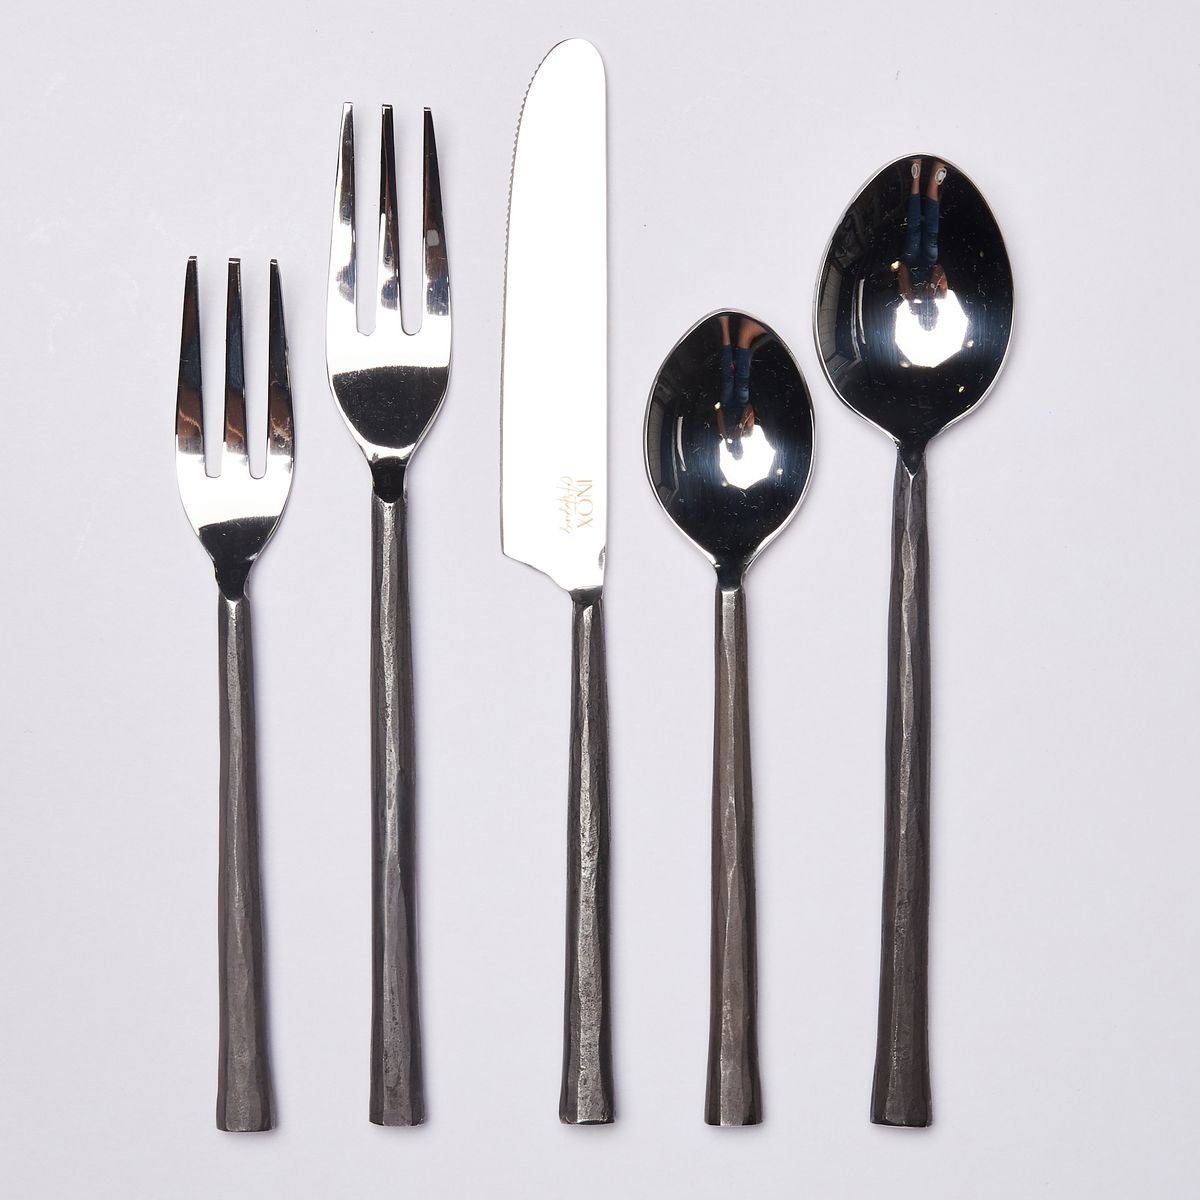 Small fork, large fork, knife, small spoon, large spoon, all with shiny tops and matte black rustic handles